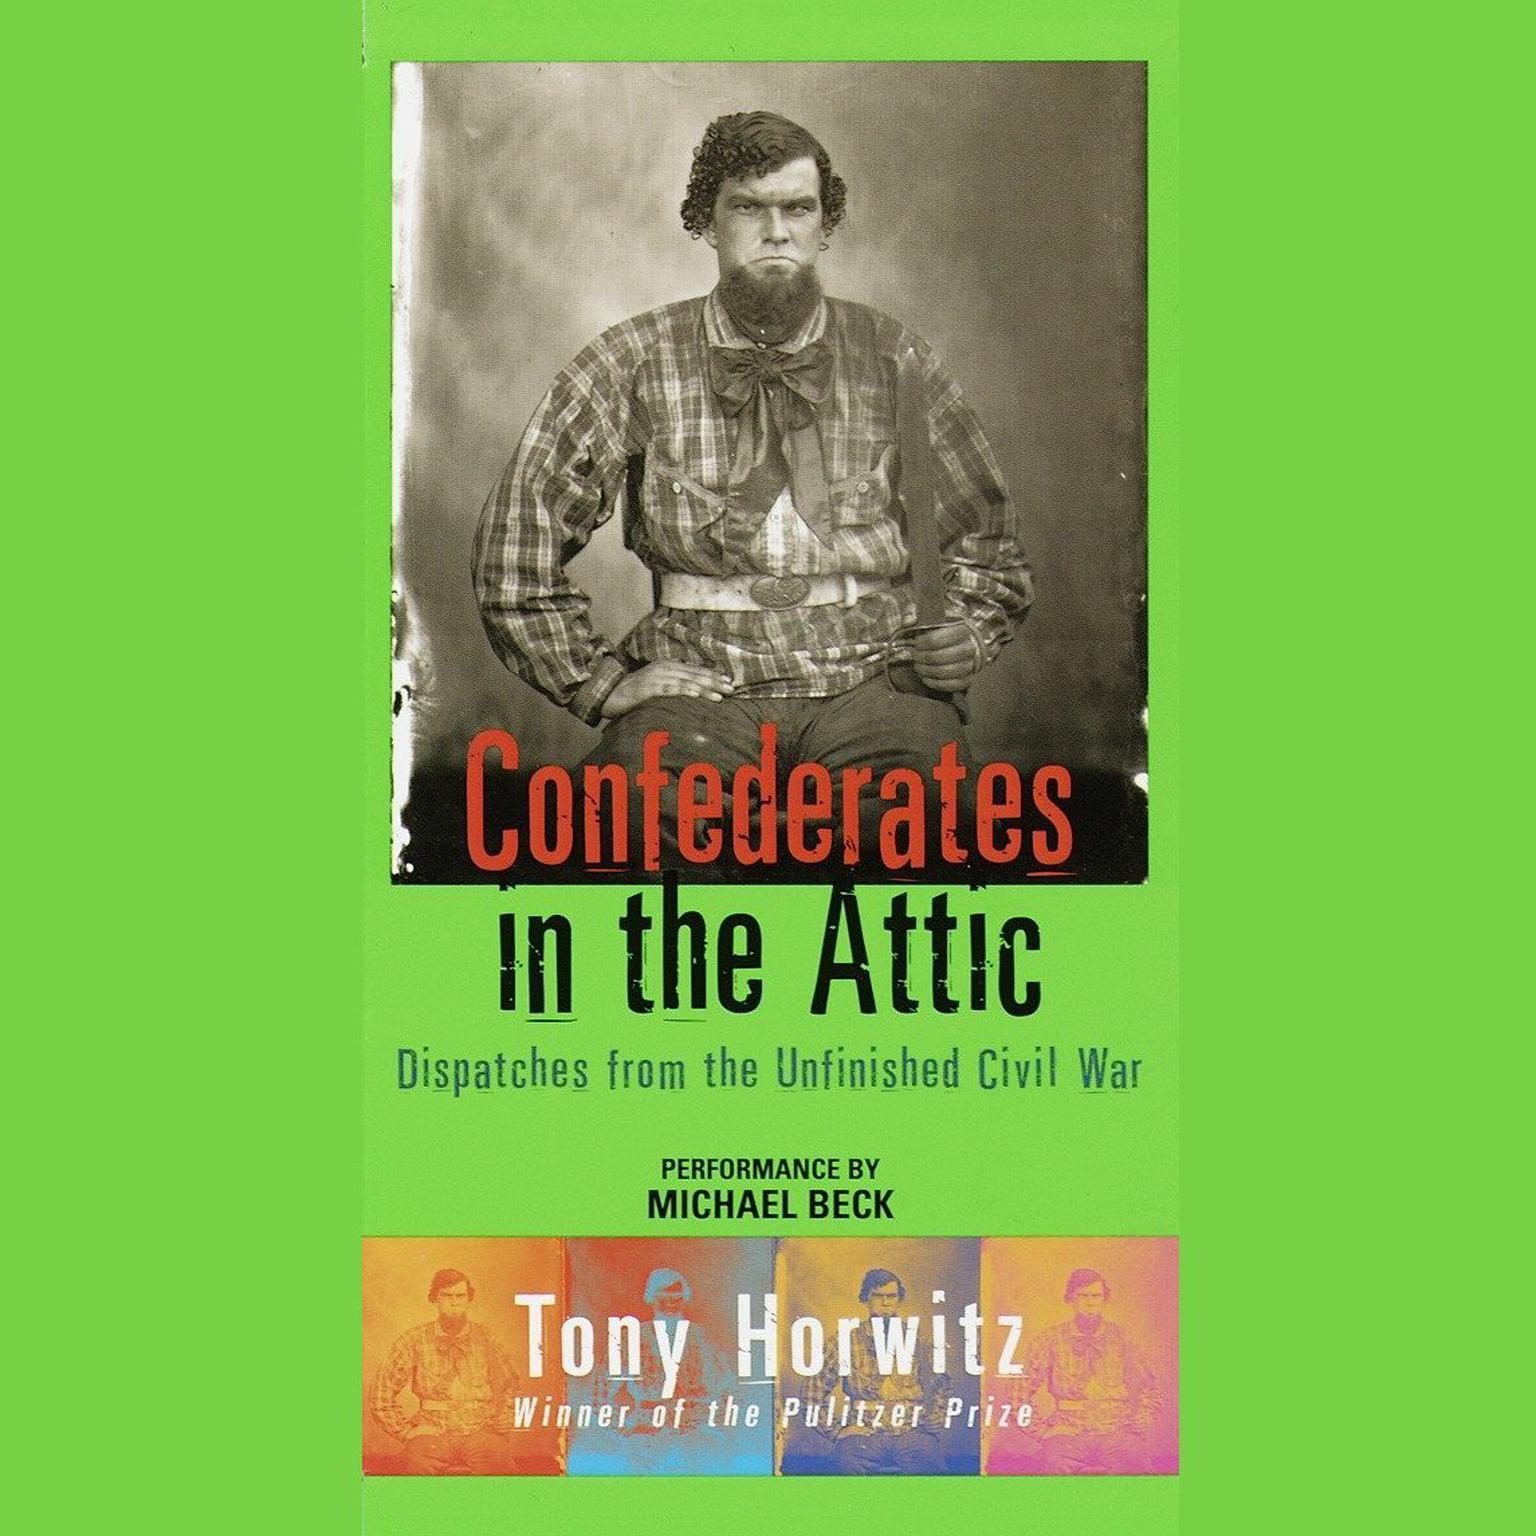 Confederates in the Attic (Abridged): Dispatches from the Unfinished Civil War Audiobook, by Tony Horwitz